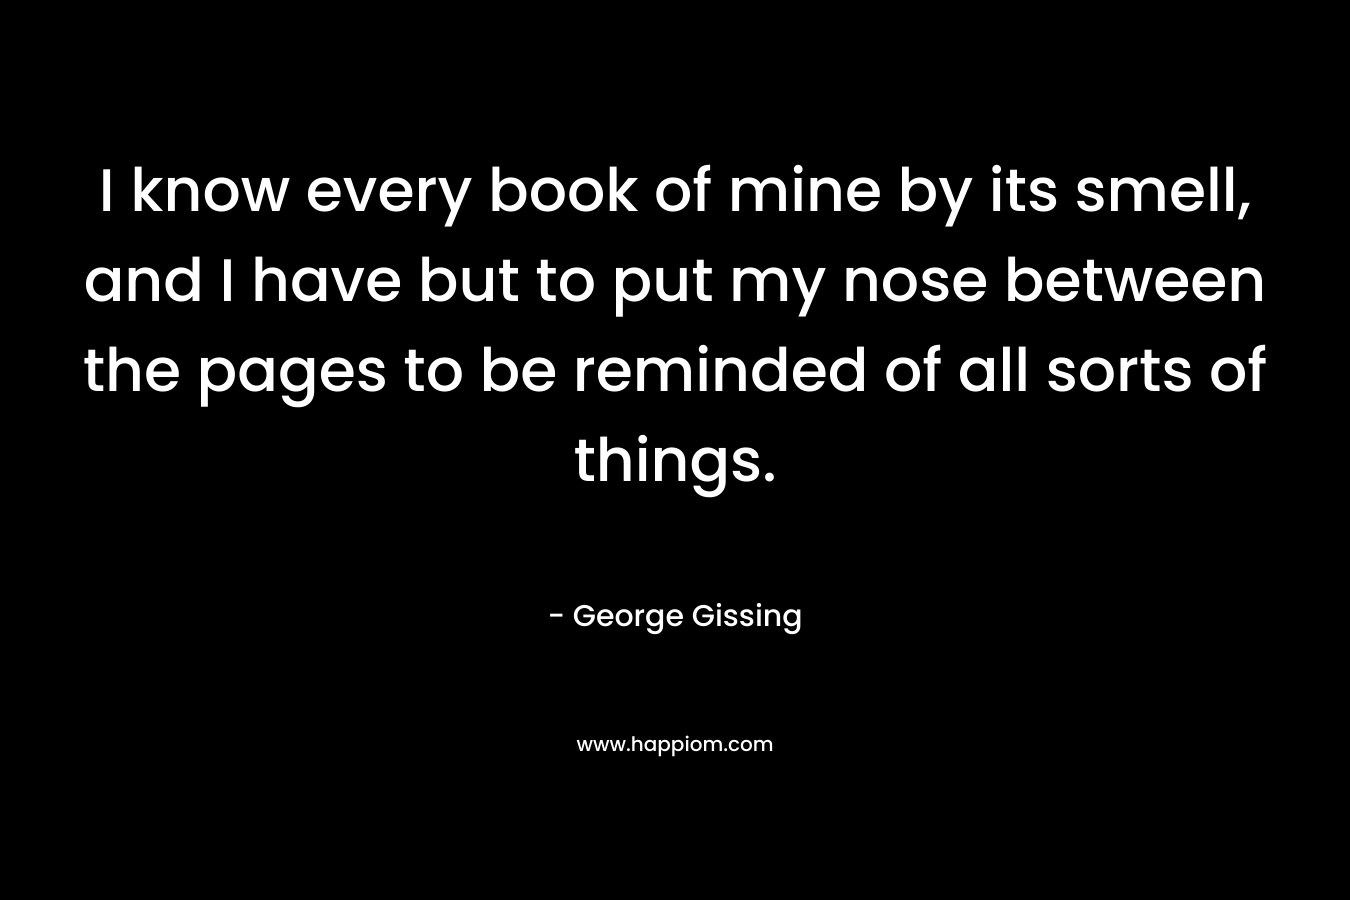 I know every book of mine by its smell, and I have but to put my nose between the pages to be reminded of all sorts of things.